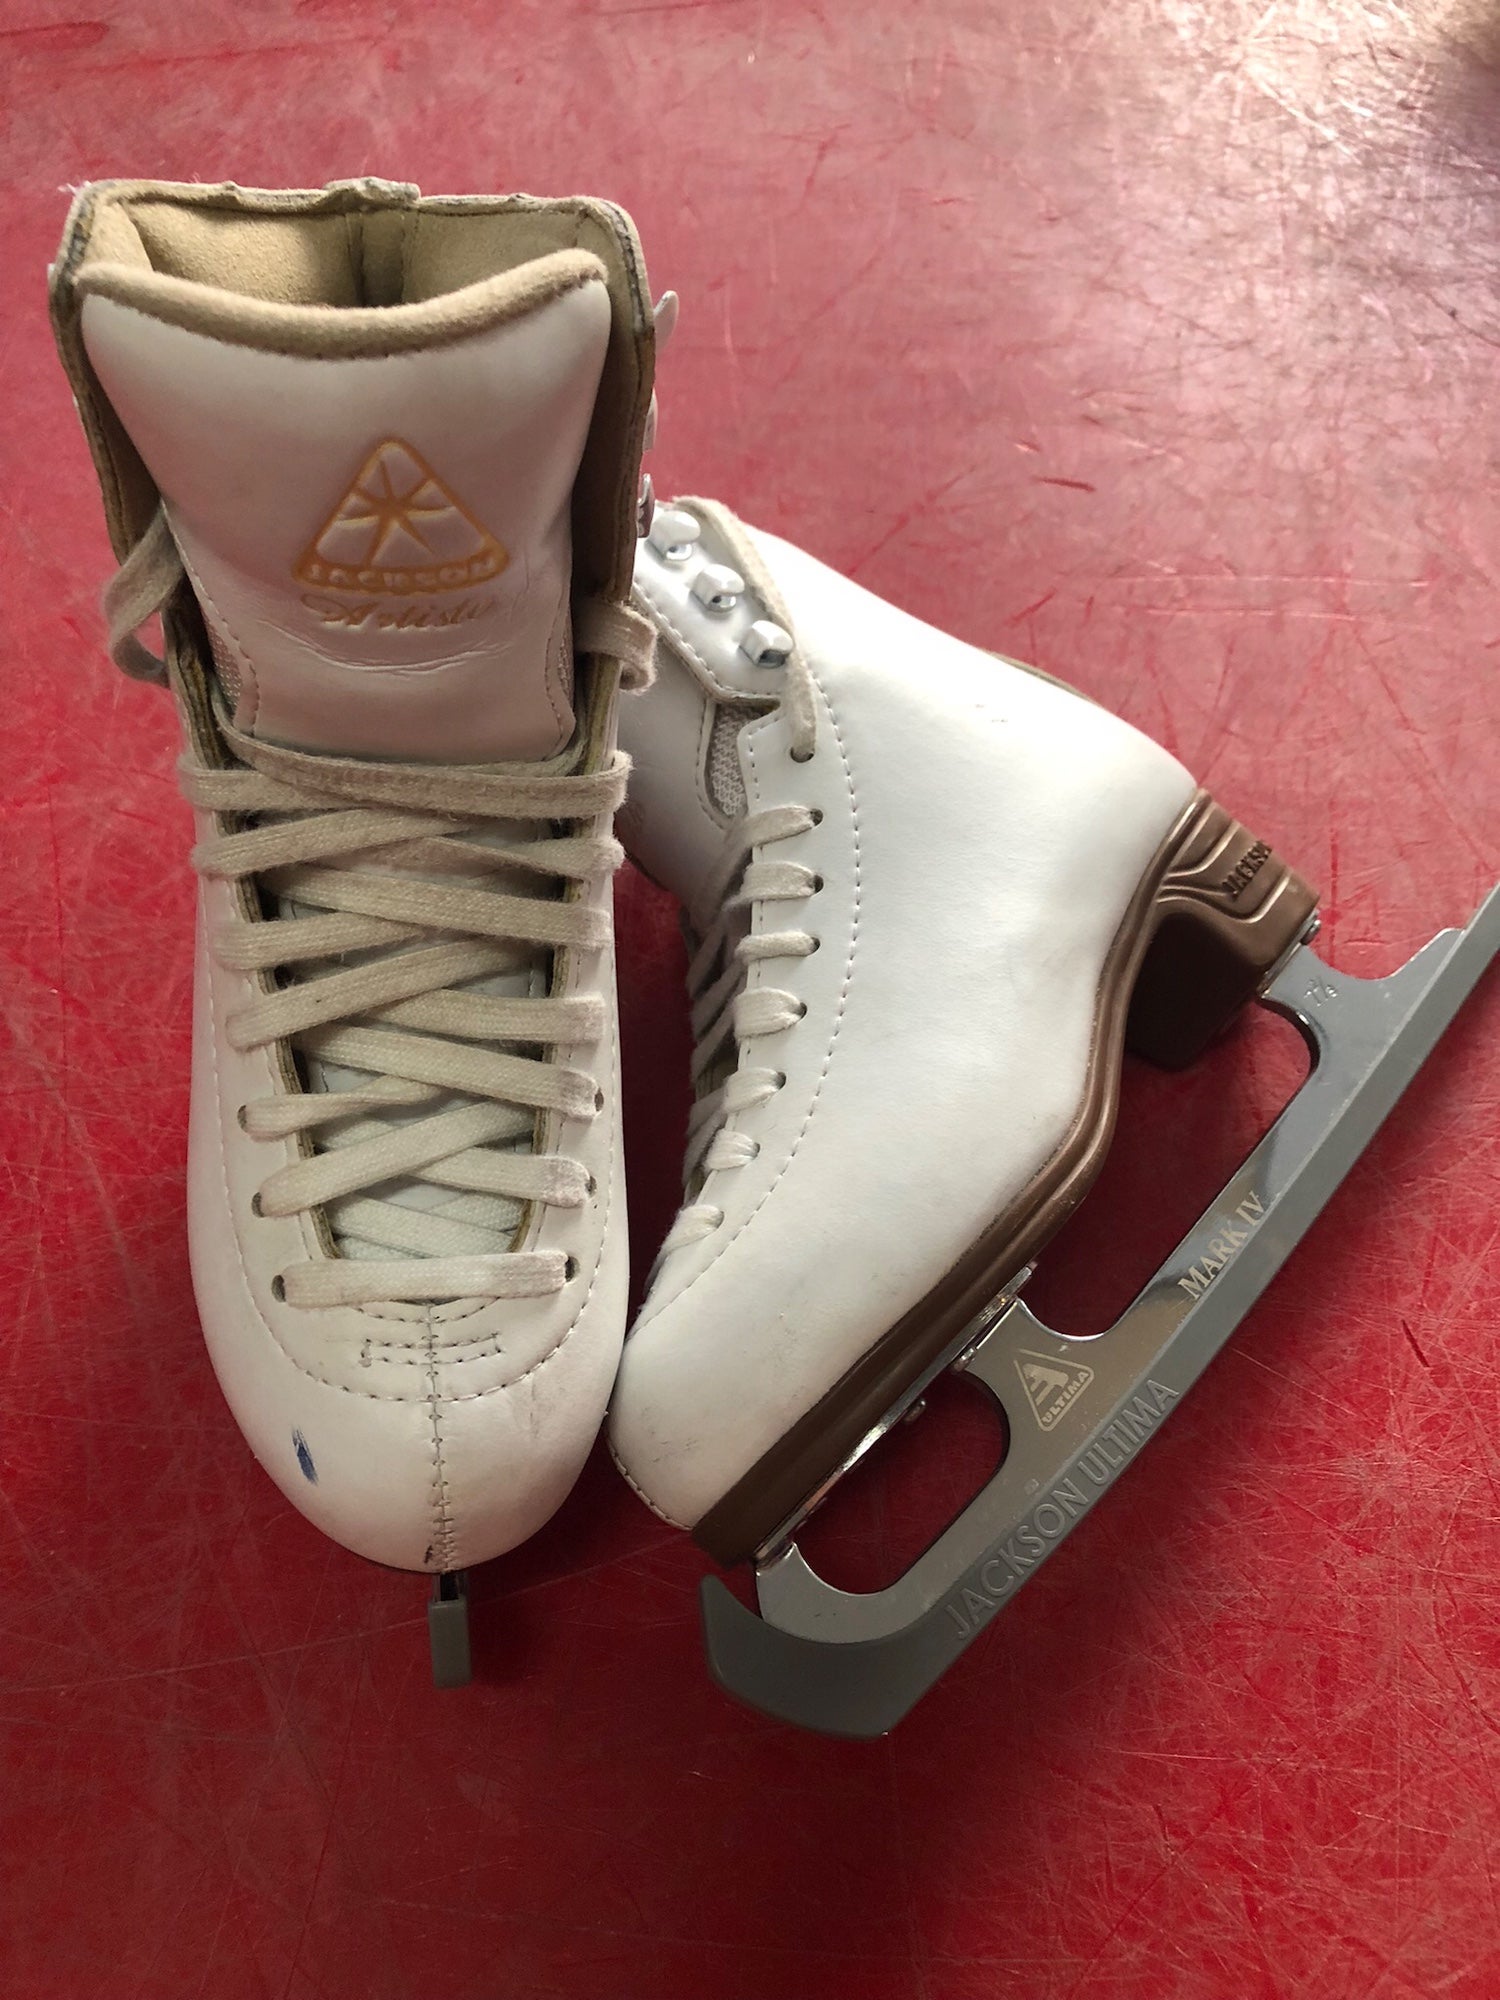 Jackson Ultima Figure Skates for sale | New and Used on SidelineSwap